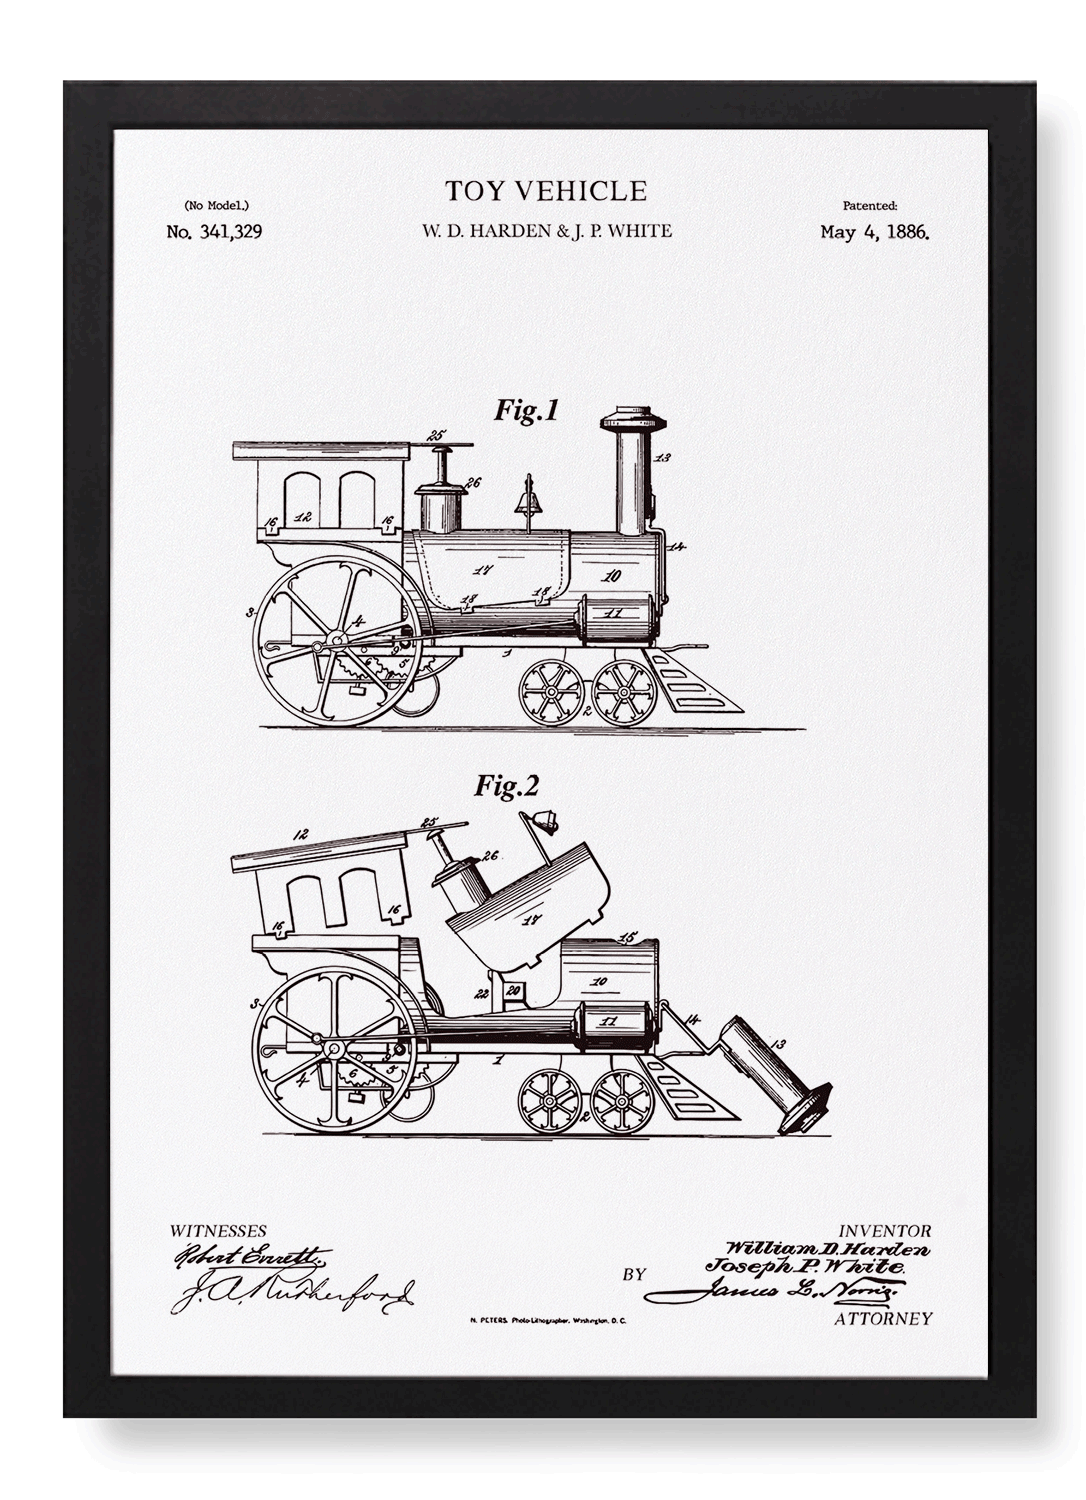 PATENT OF TOY TRAIN (1886)